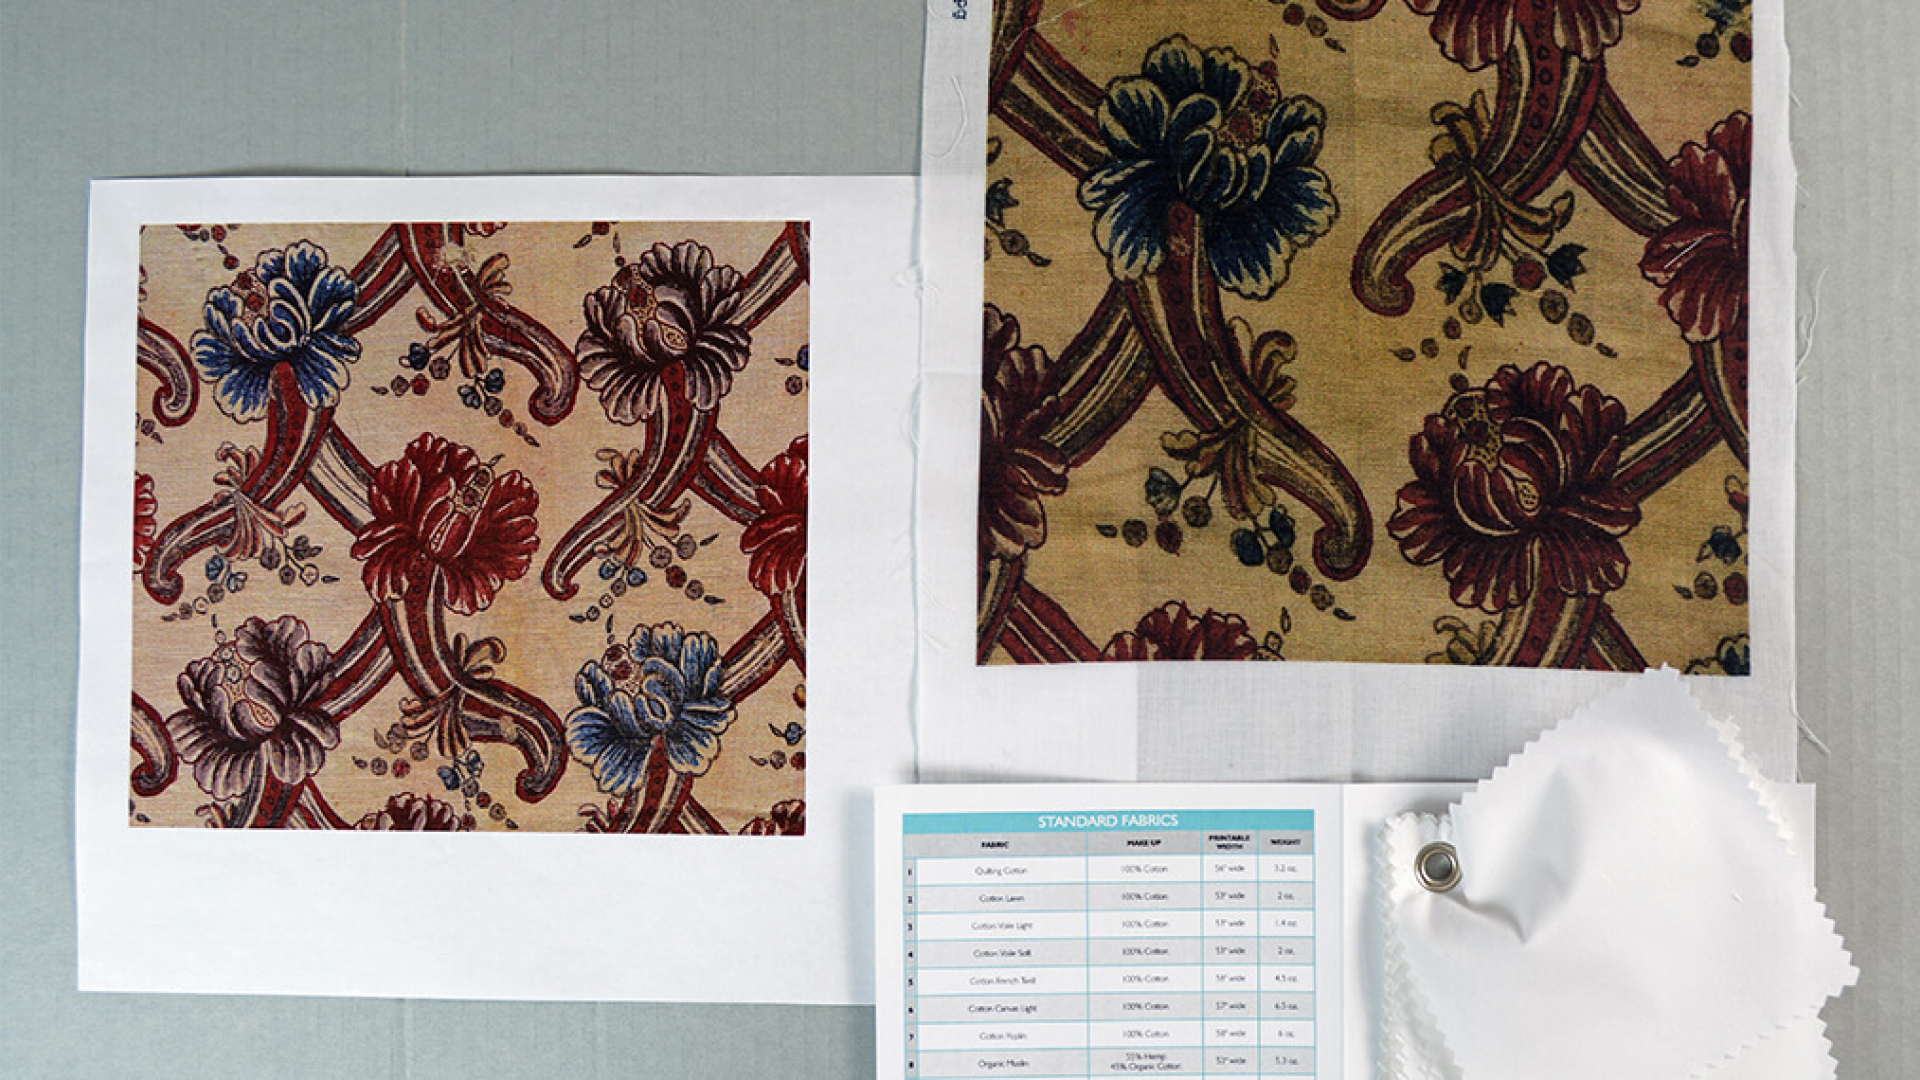 A fabric sample book and examples of design motifs from the cope.